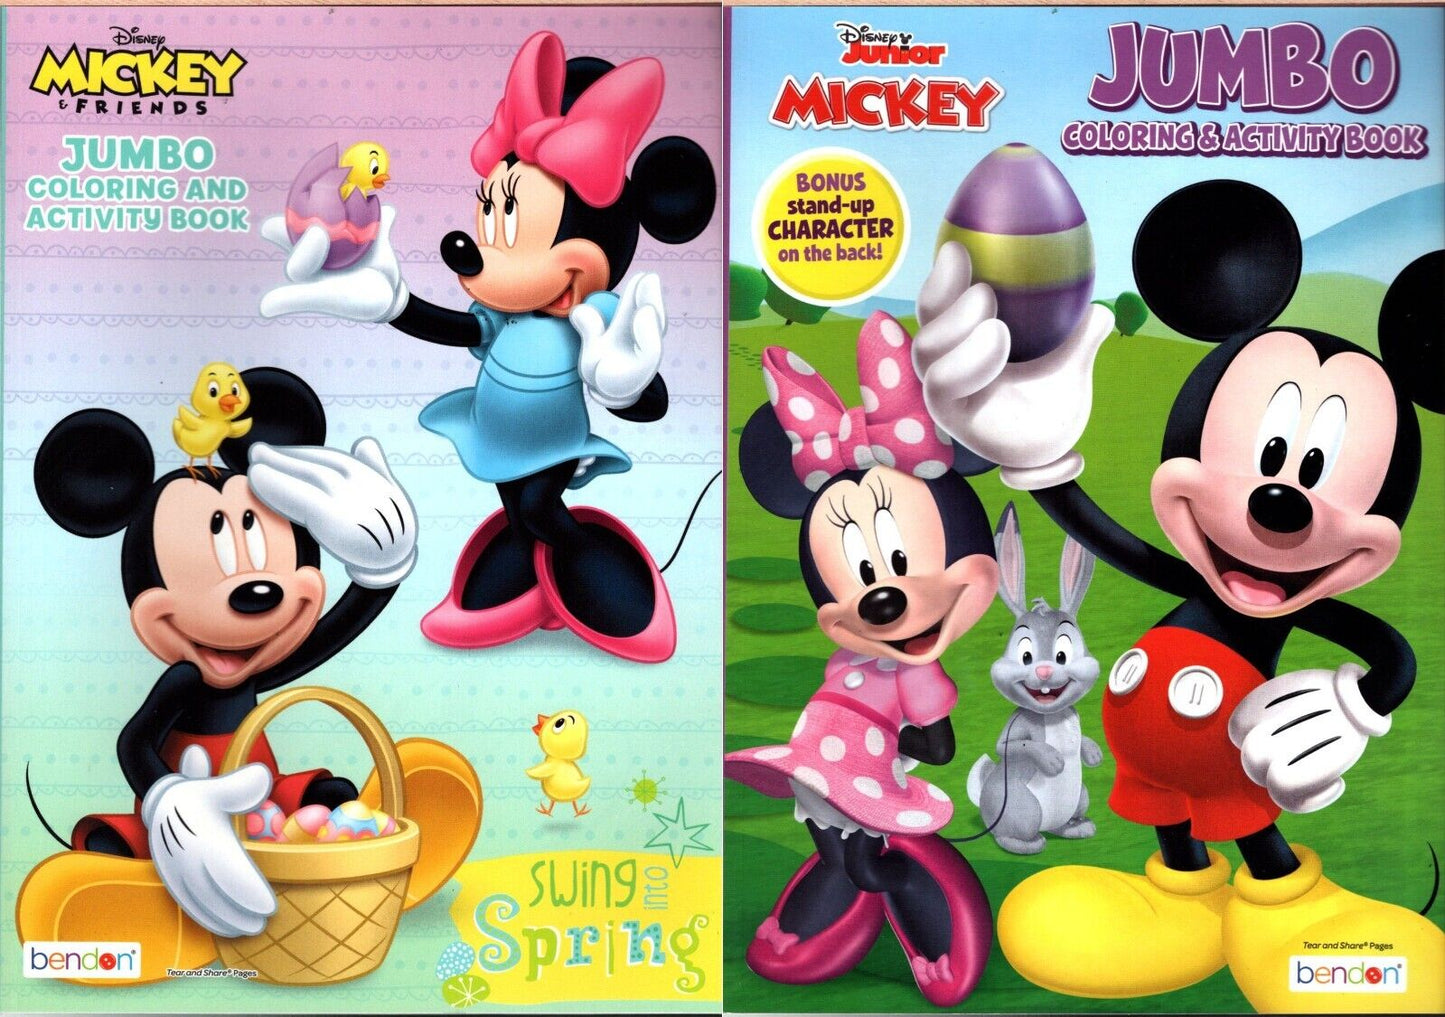 Disney Mickey Friends - Jumbo Coloring & Activity Book - Swing into Spring Set